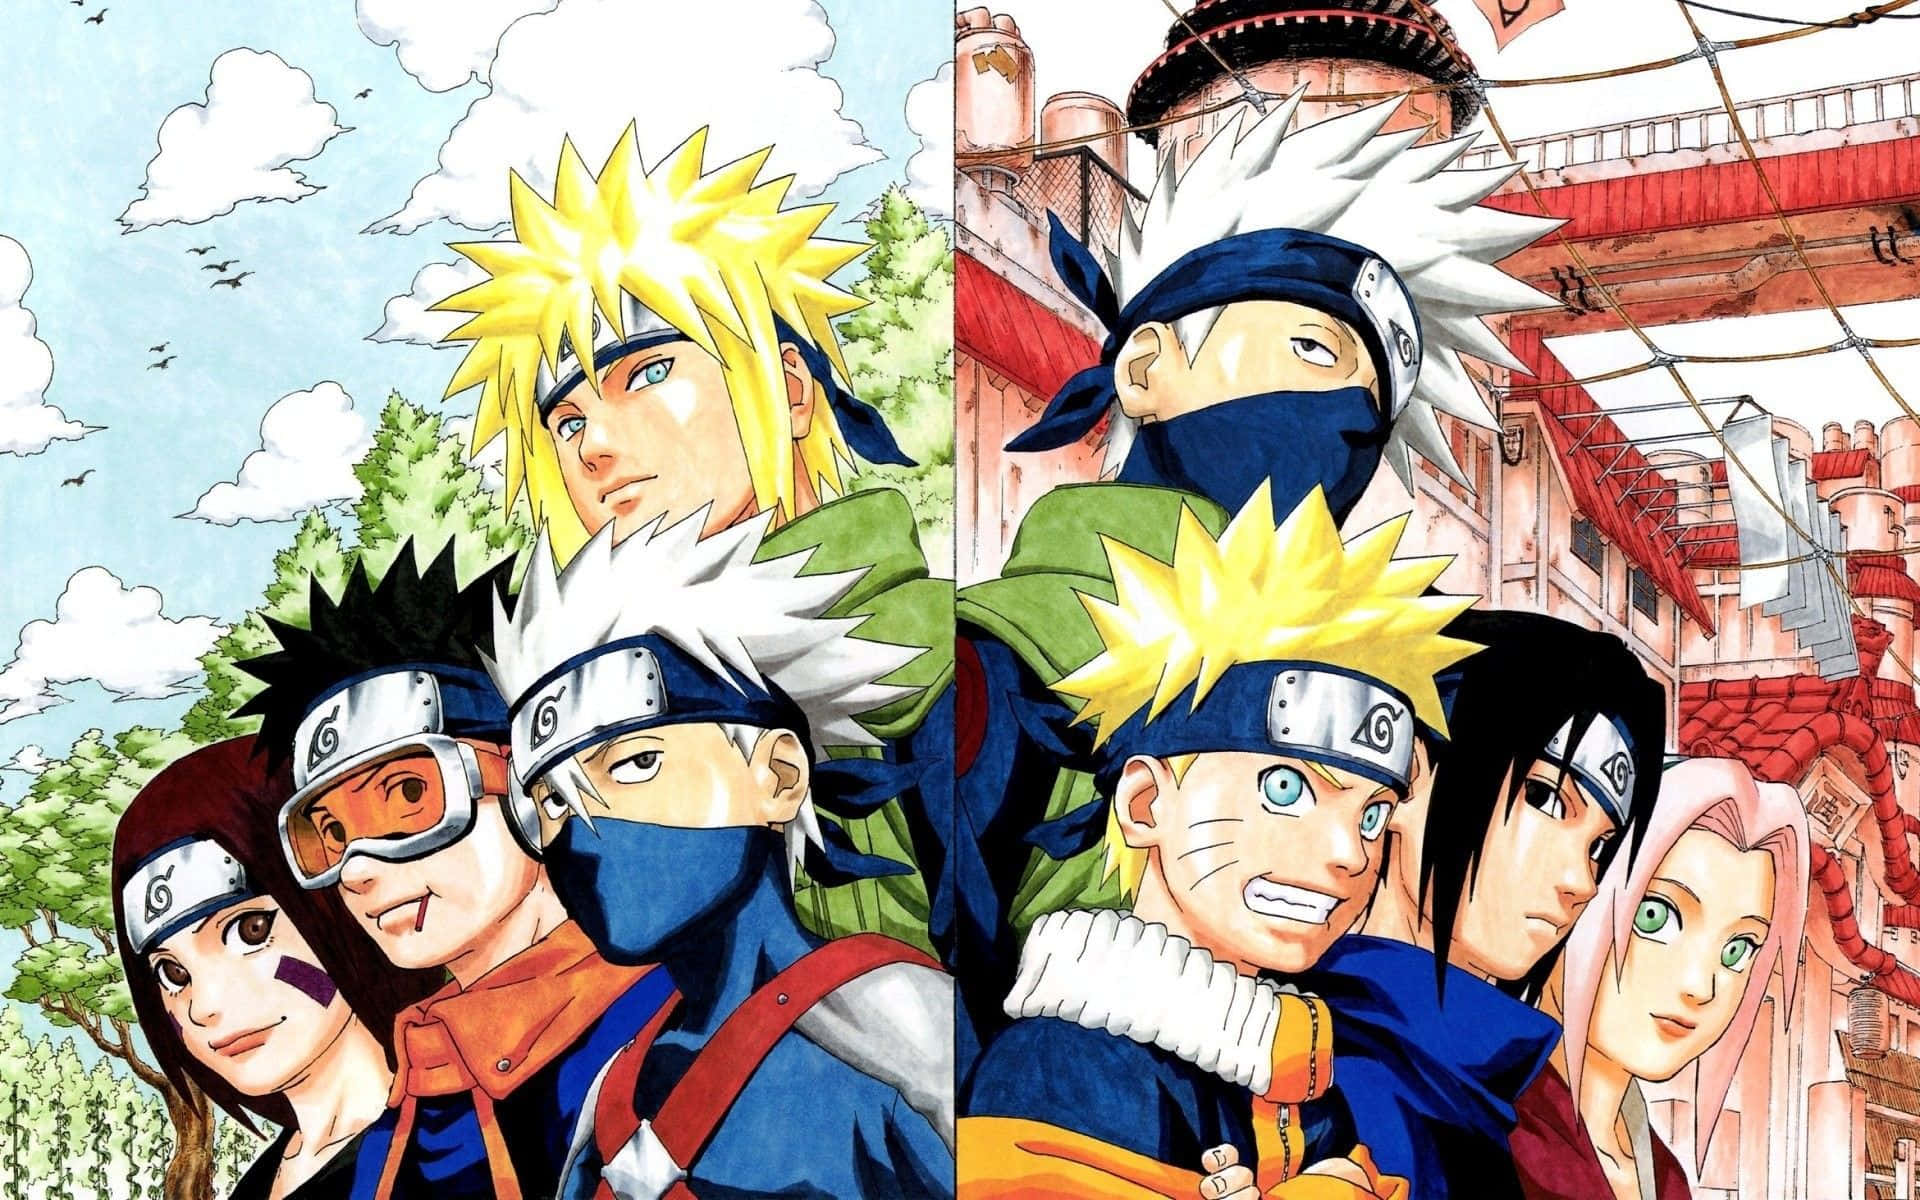 A moment of camaraderie between Naruto and his friends Wallpaper